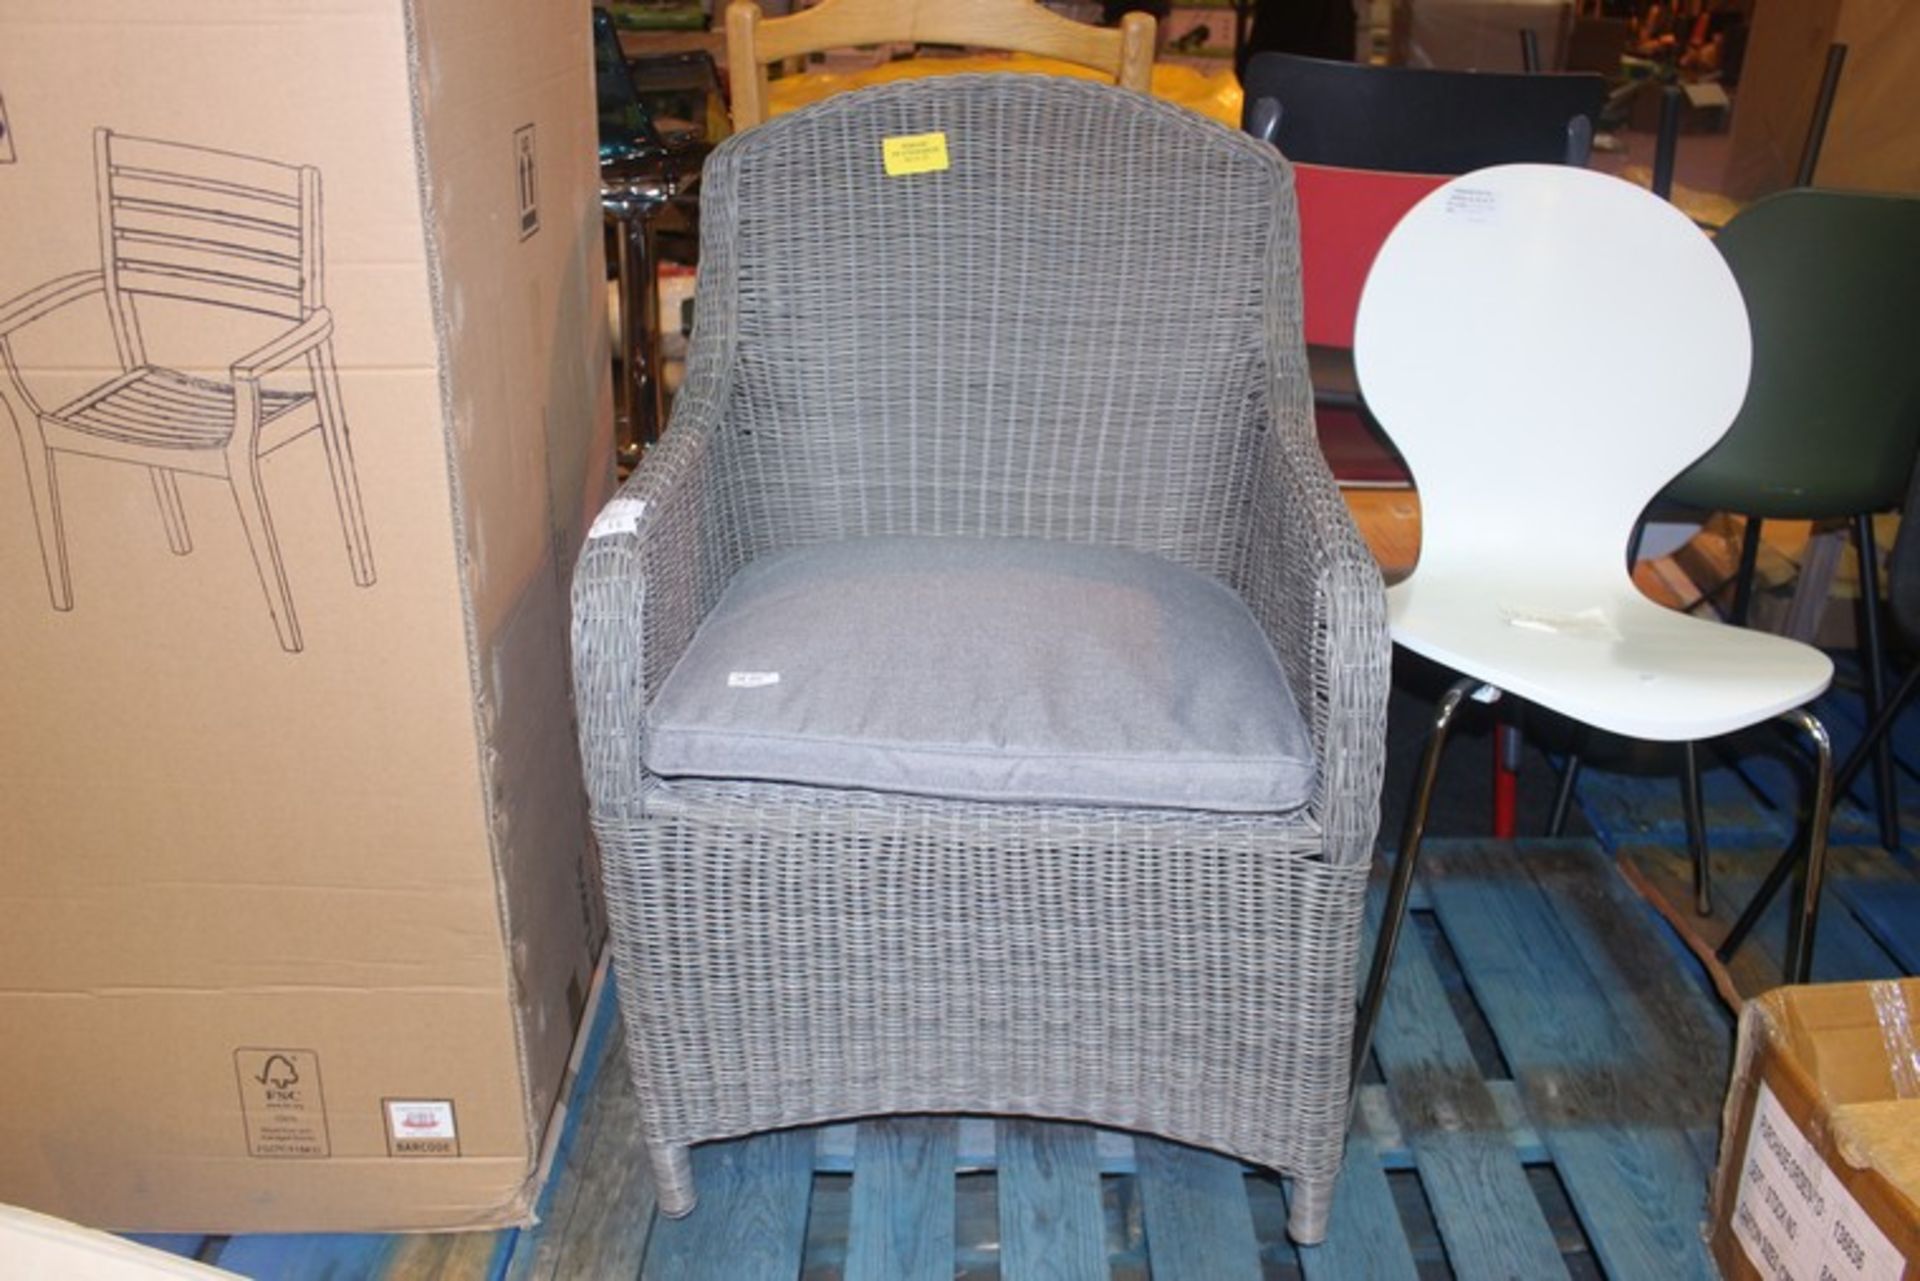 1 x DANTE OUTDOOR ARM CHAIR RRP £320 (02/11/17) (82082031) *PLEASE NOTE THAT THE BID PRICE IS